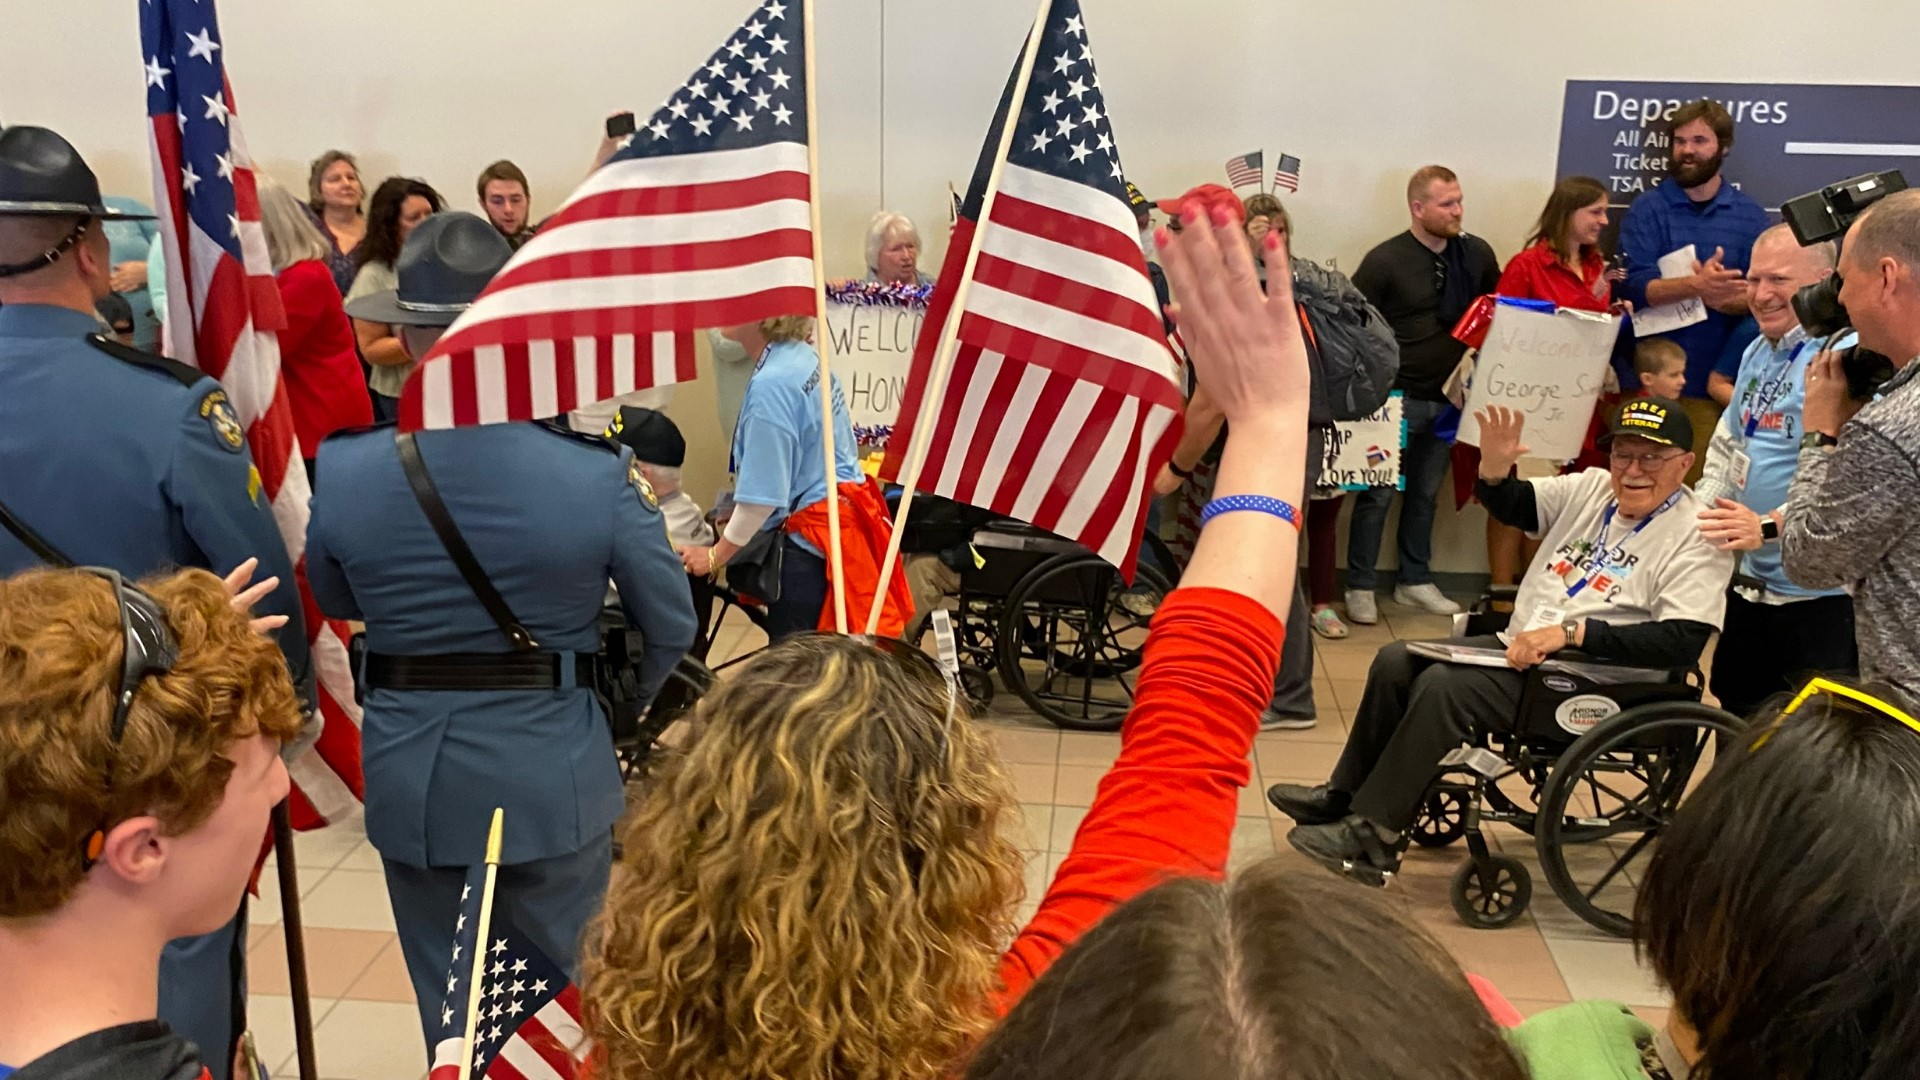 A crowd of more than 150 people packed into the Portland Jetport terminal to cheer the veterans after they got off the plane.